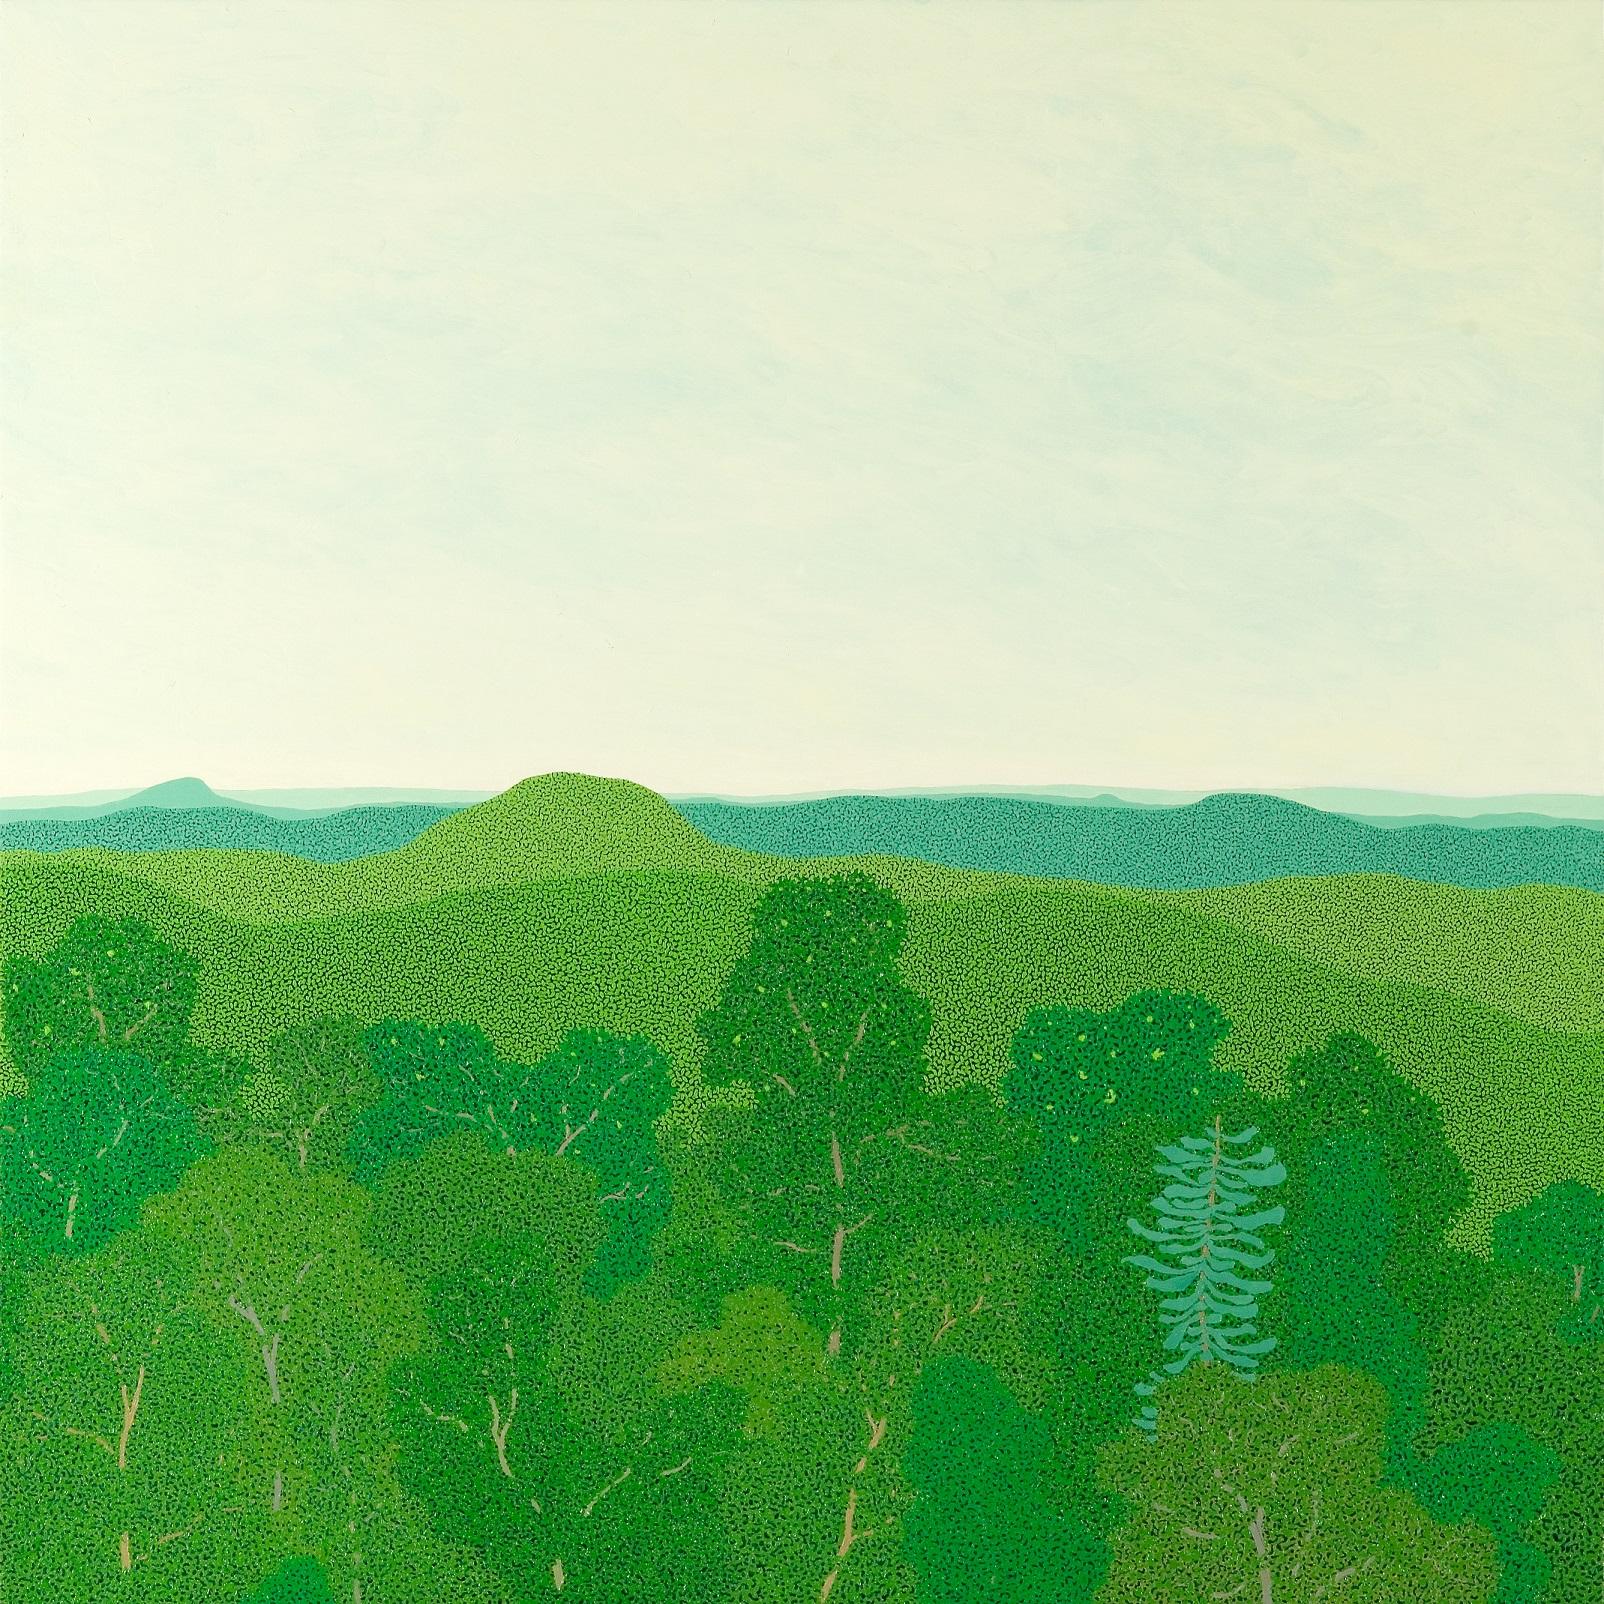 Gregory Hennen Landscape Painting - View from Wyatt Mt Looking East, Virginia Landscape with Mountains and Trees